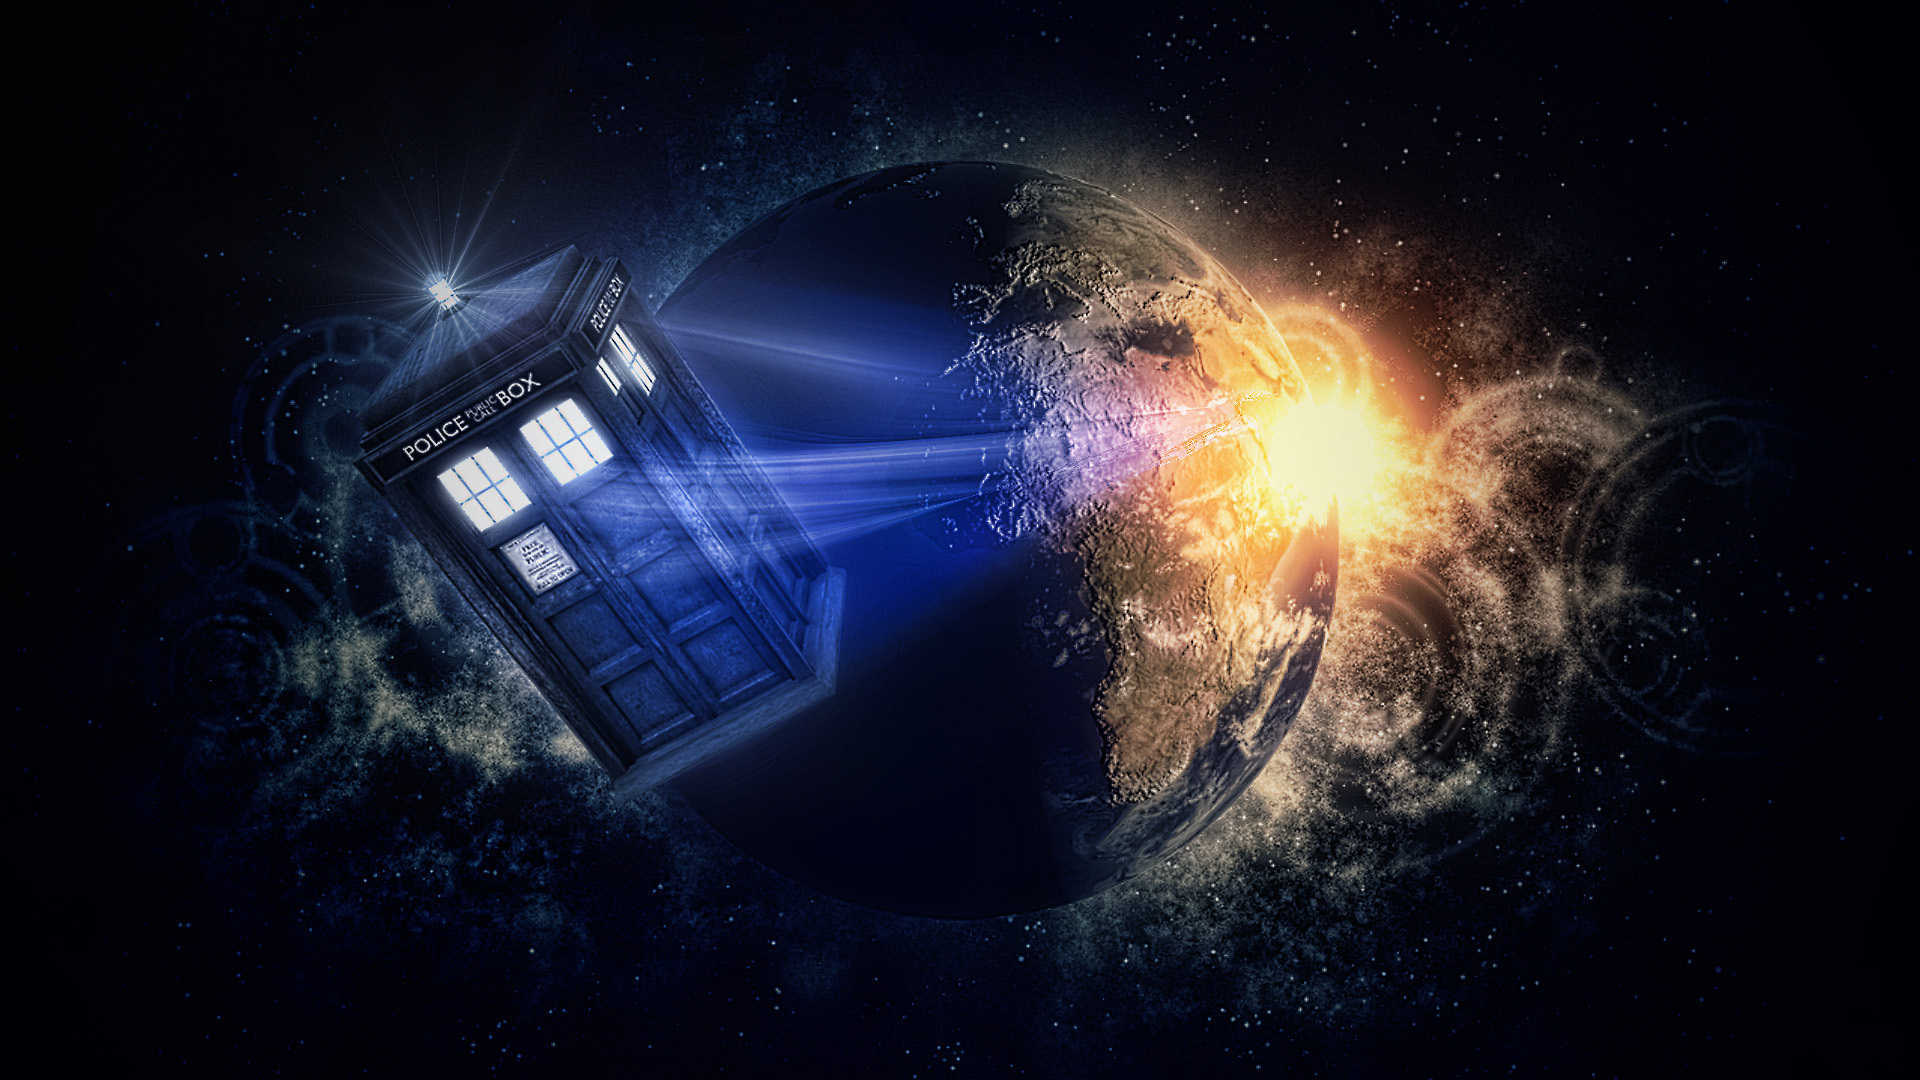 Wallpaper Doctor Who 05 HD Wallpaper Upload at September 26 2014 by